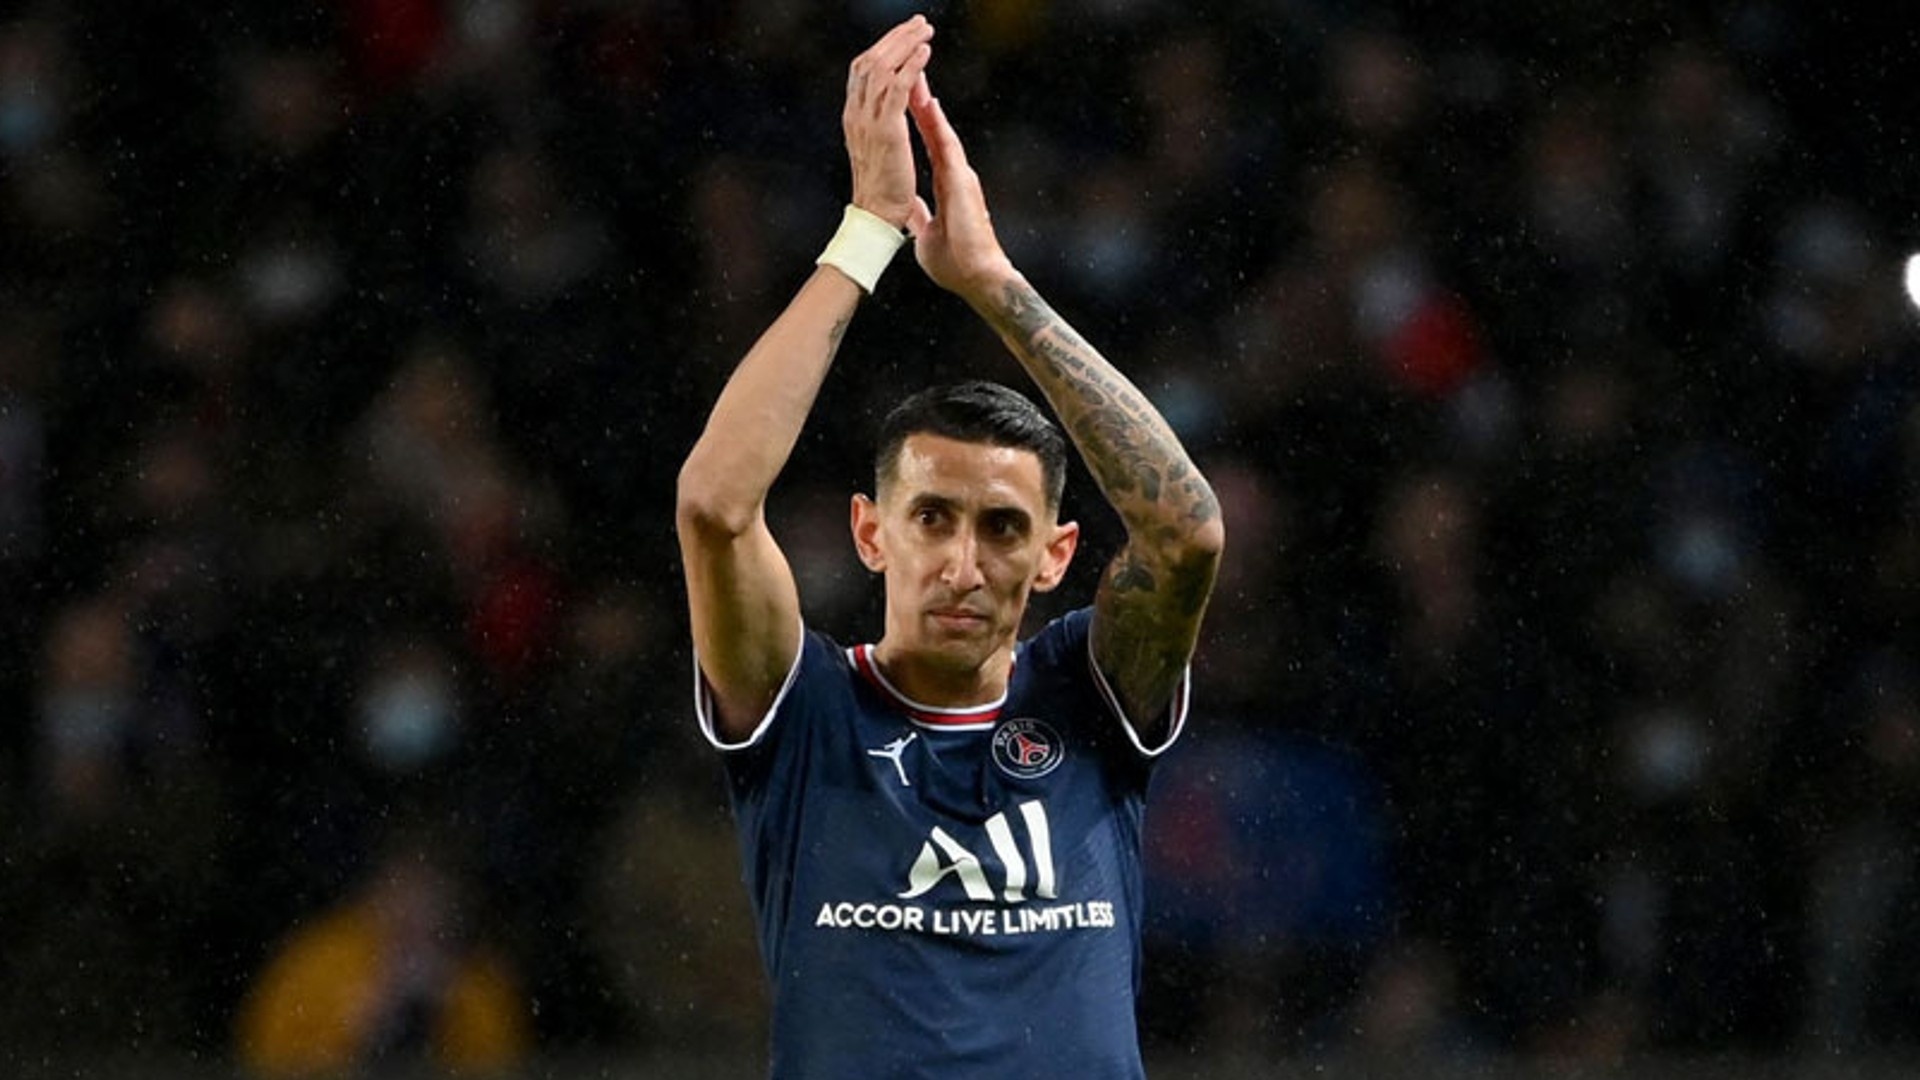 Di Maria to Juventus explained: the latest news surrounding the transfer